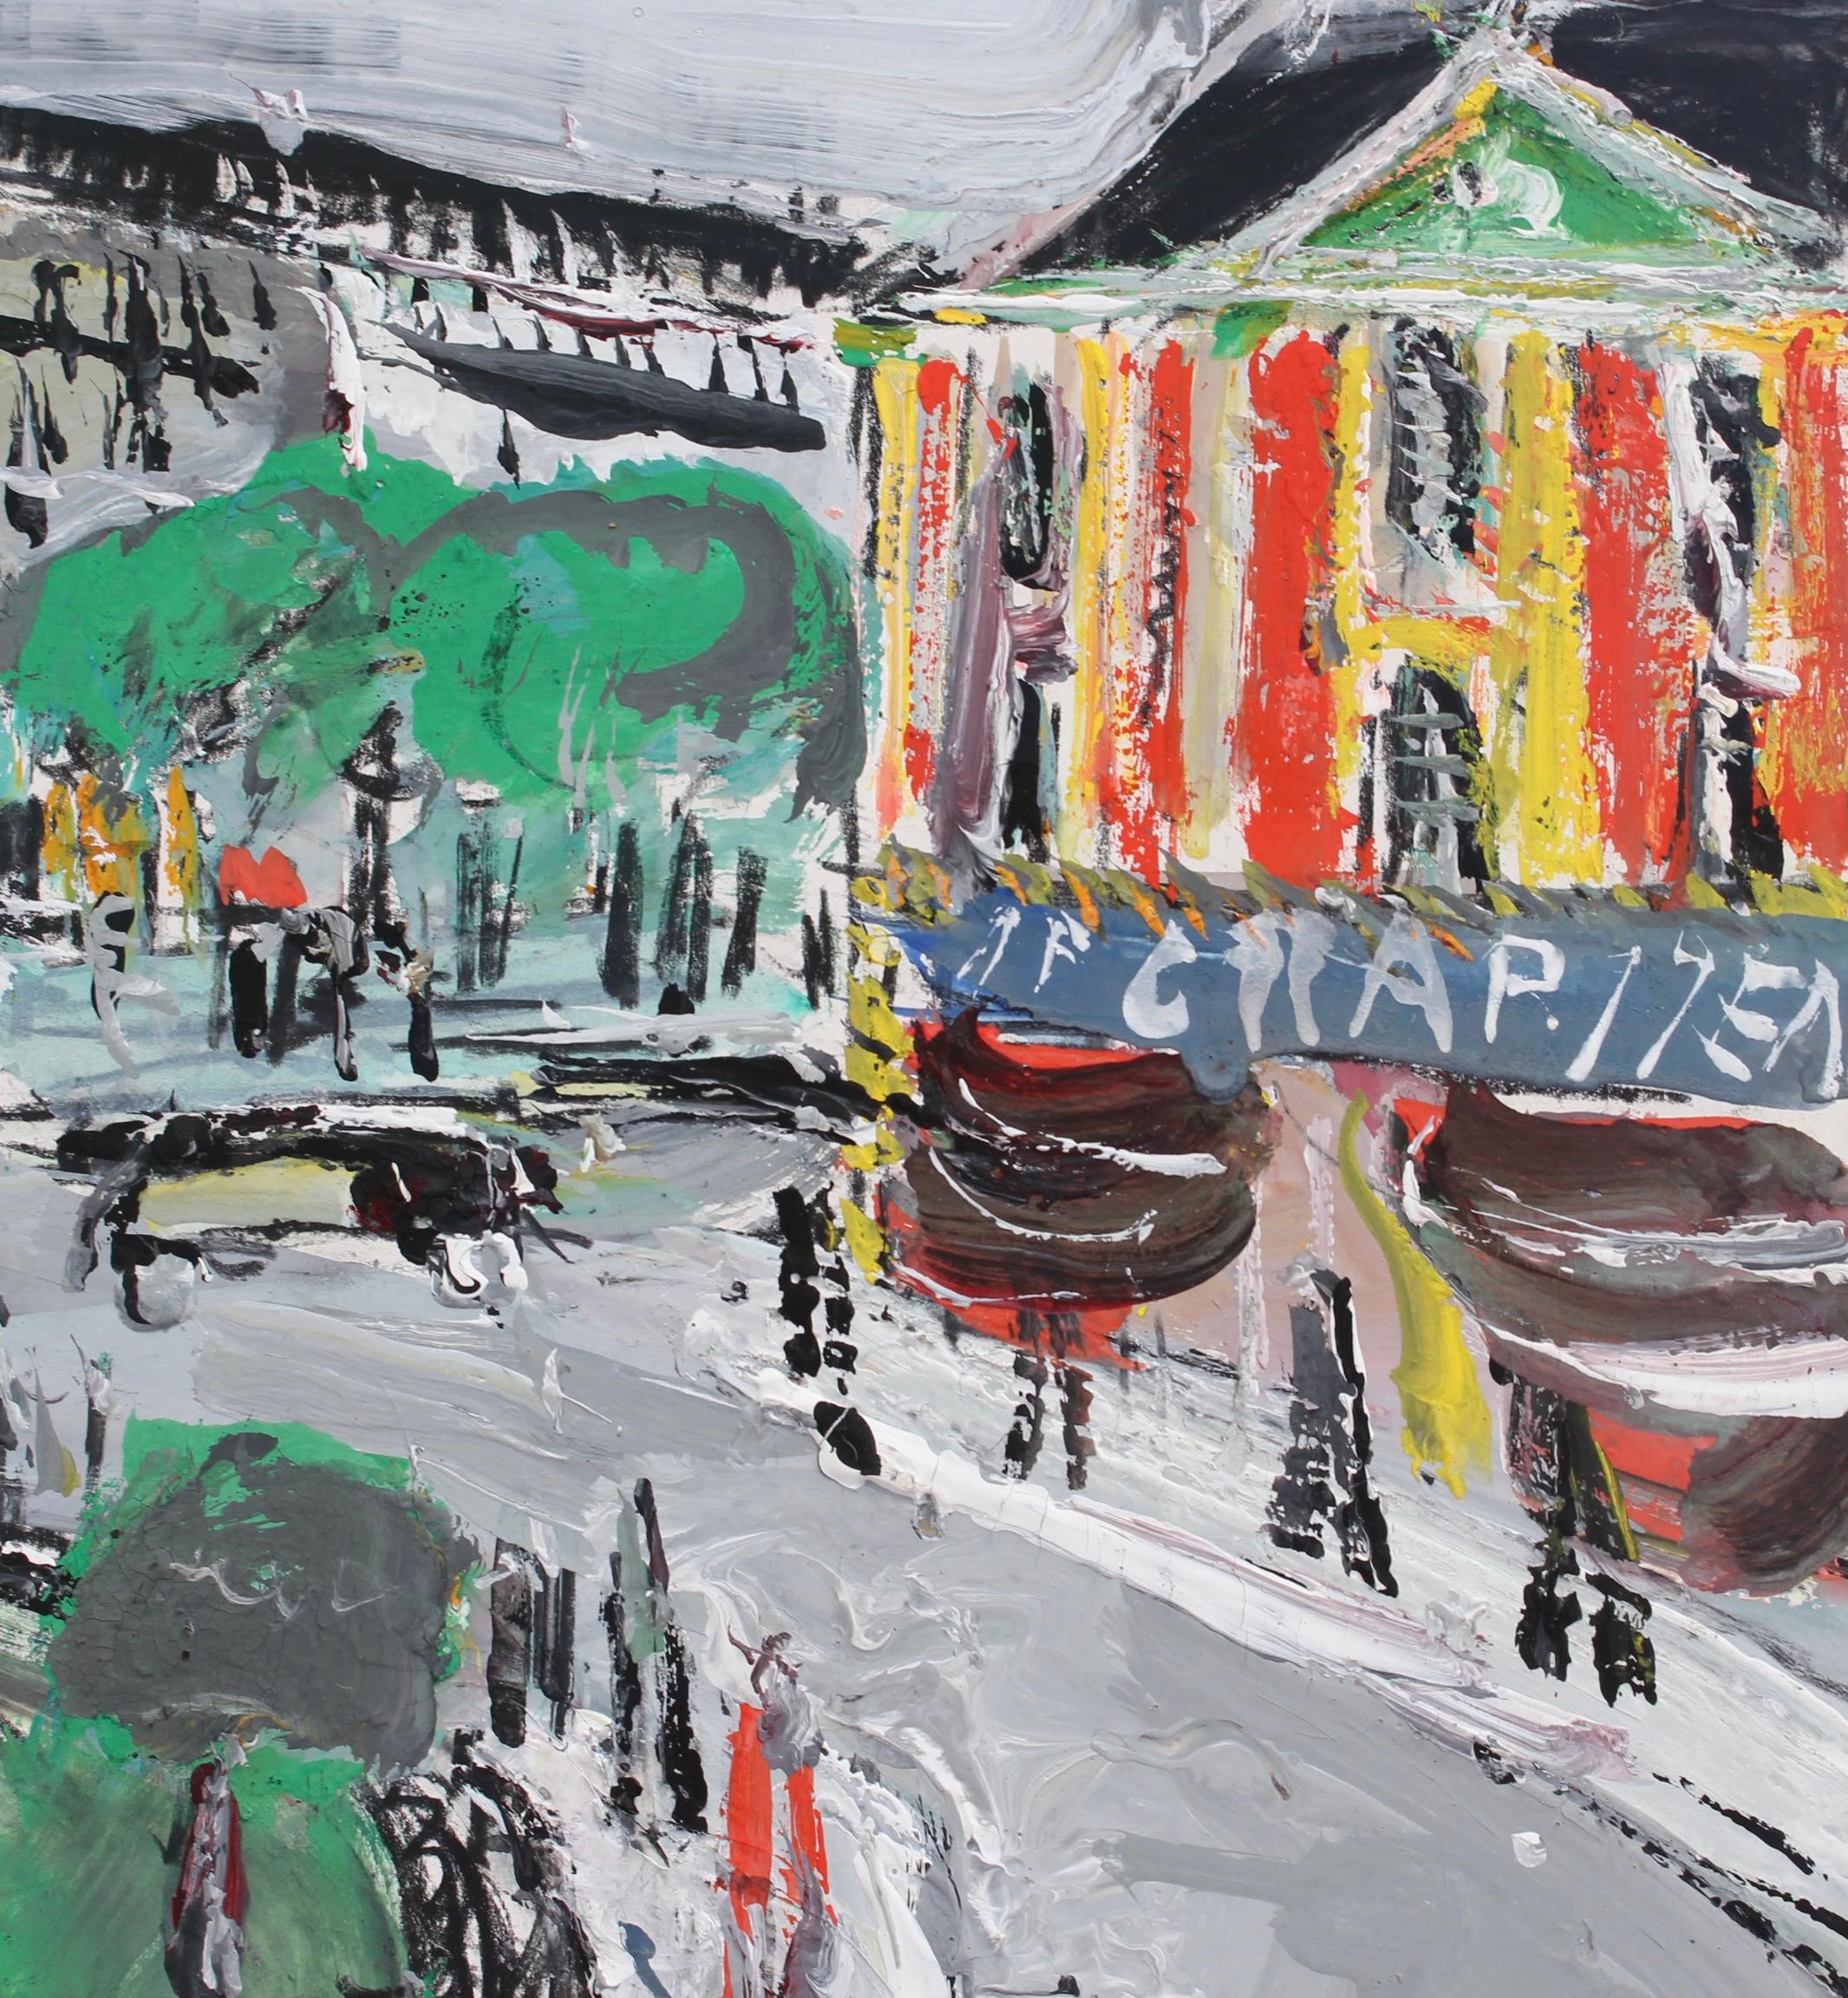 'Place Pigalle', oil and gouache on art paper, by Lucien Génin (circa 1930s). Pigalle is well known to tourists who want to experience 